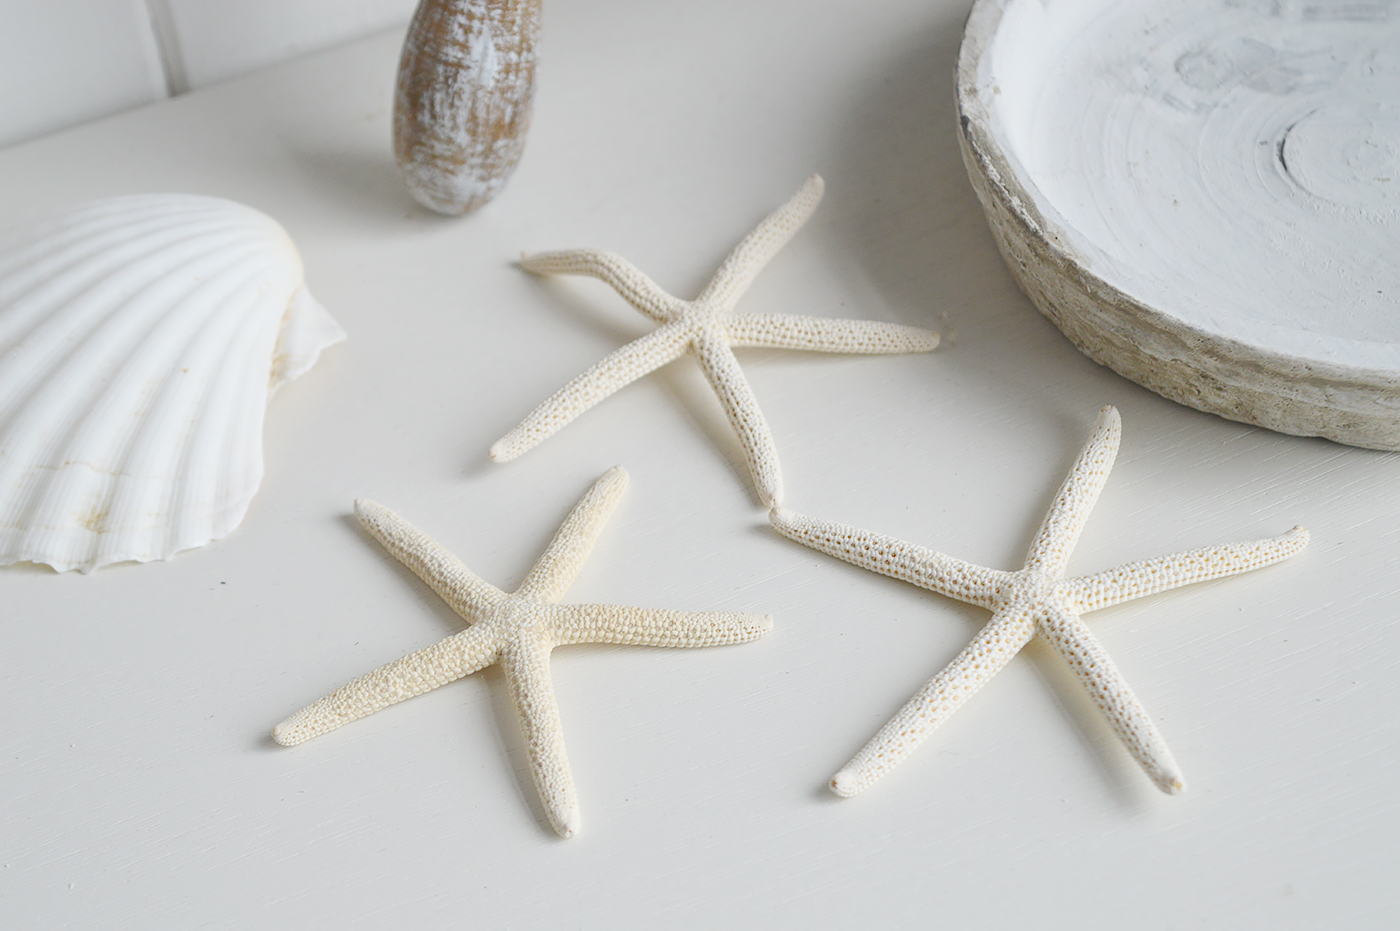 Nautical, coastal and beach home decor accessories and Furniture from The White Lighthouse Furniture - Decorative Starfish and Shells